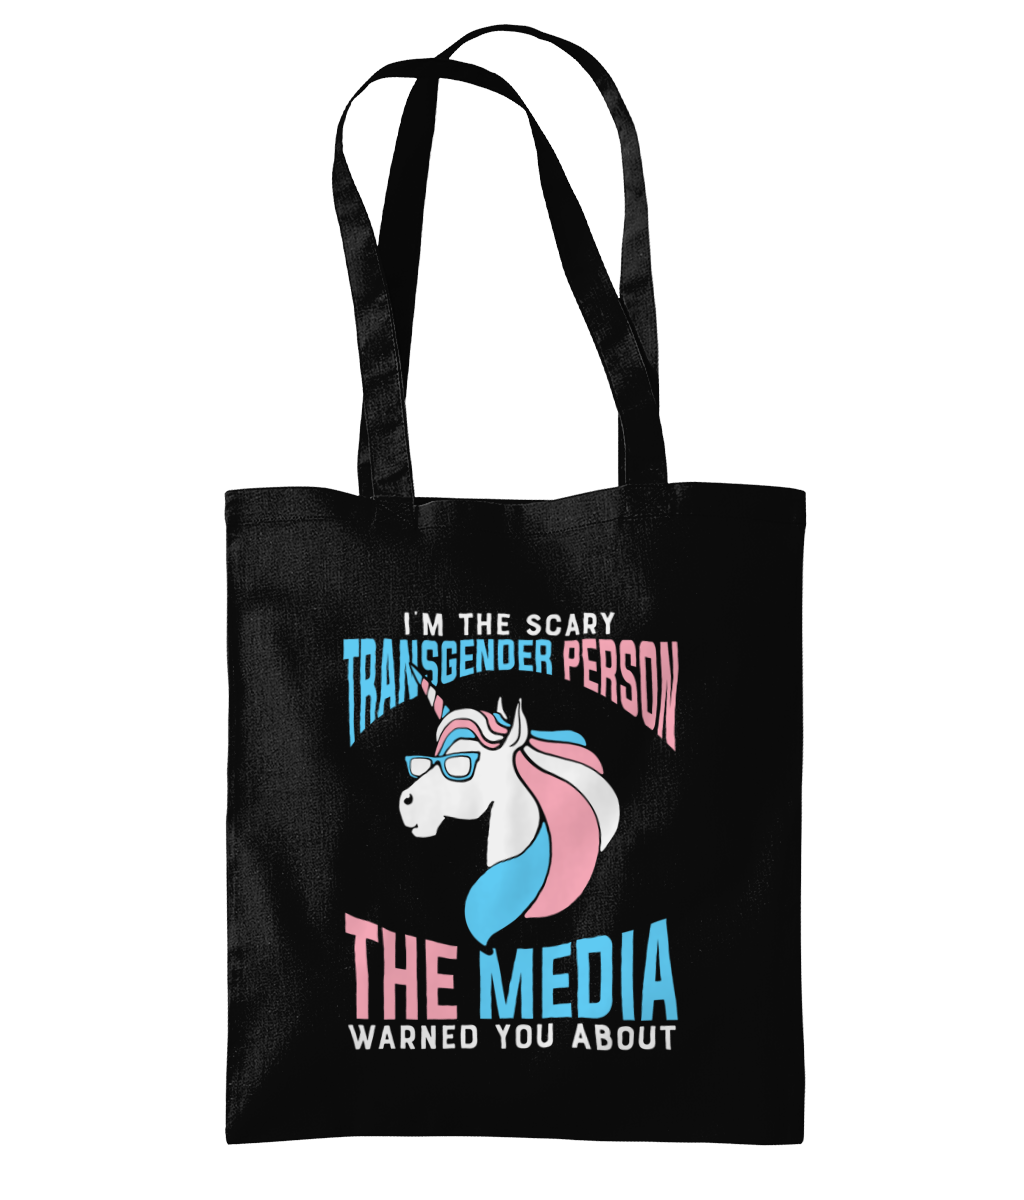 Scary trans person tote bag